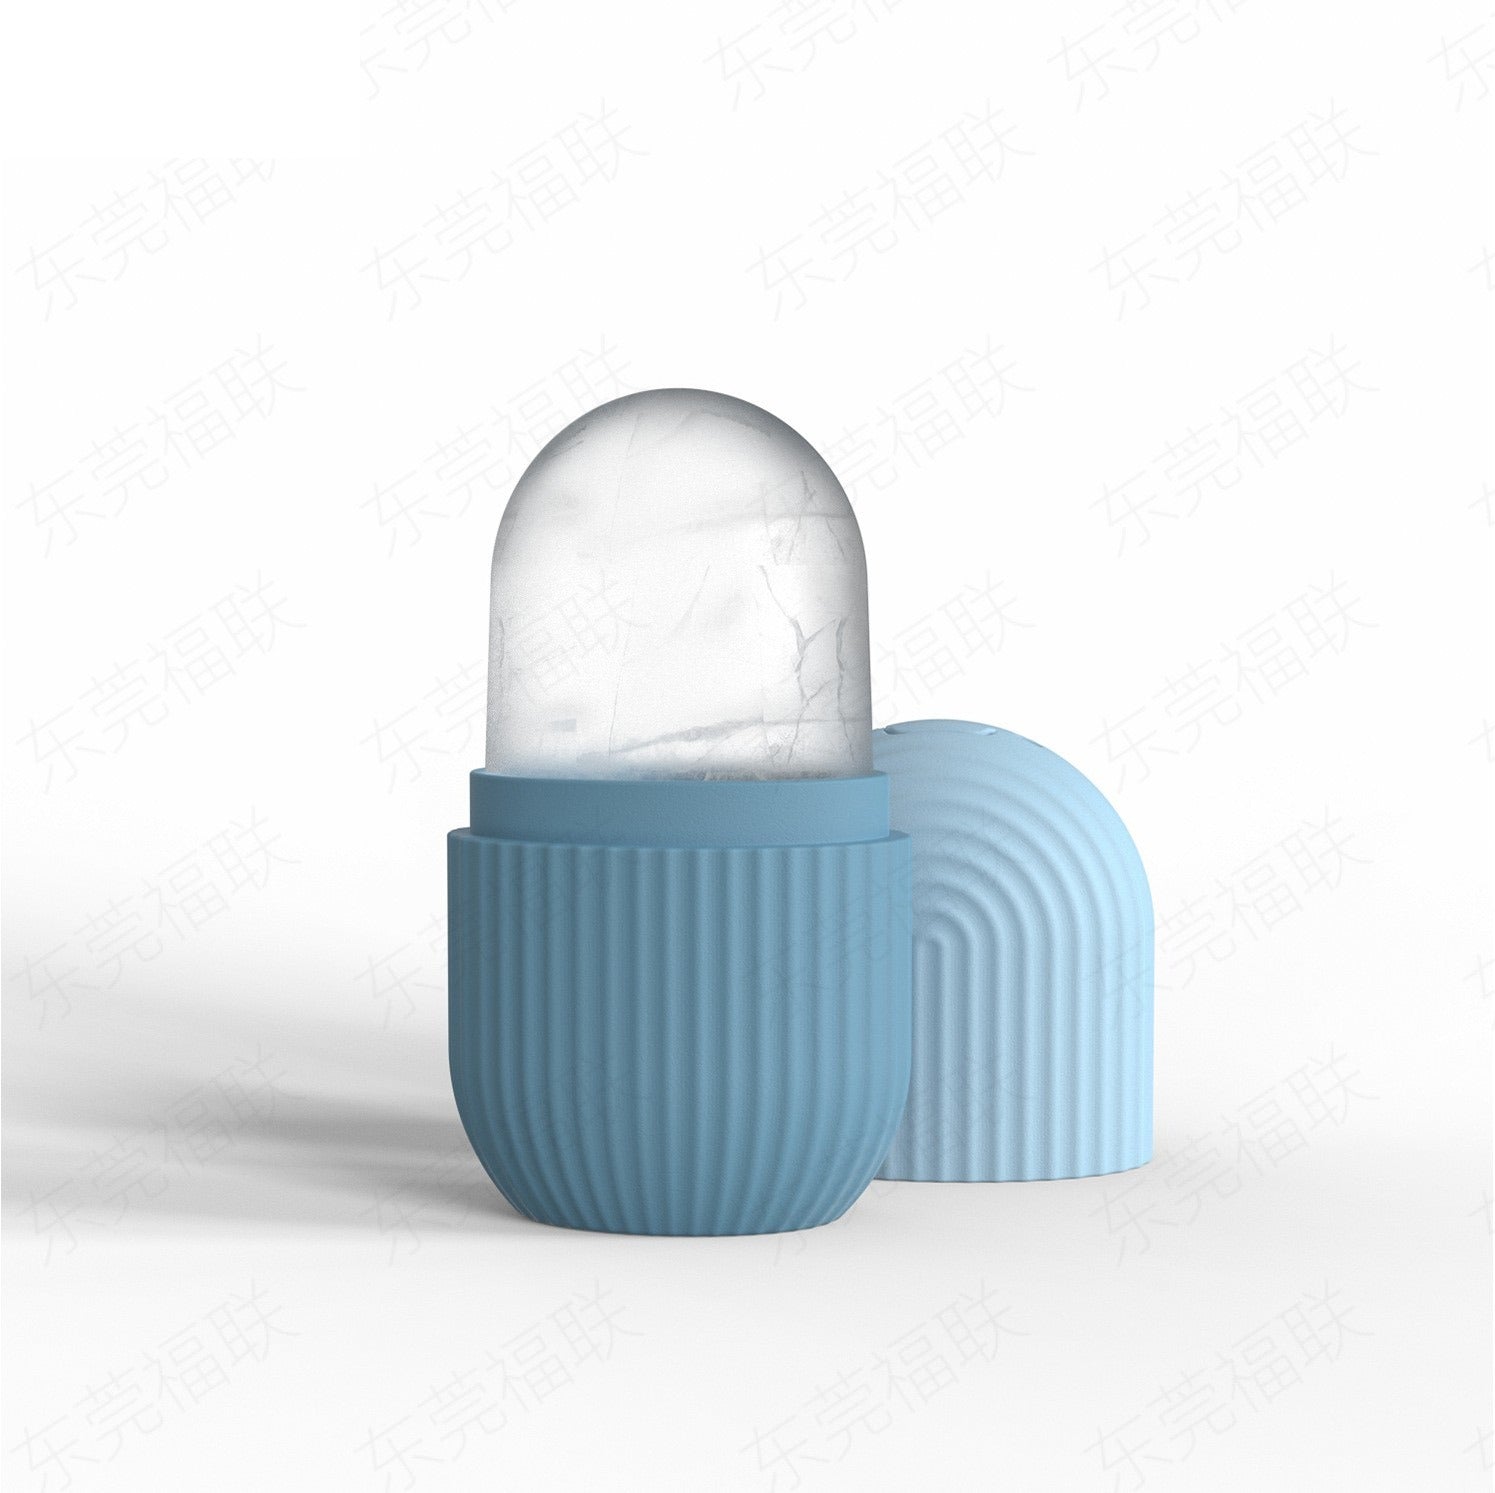 Silicone Ice Roller Massager in blue color